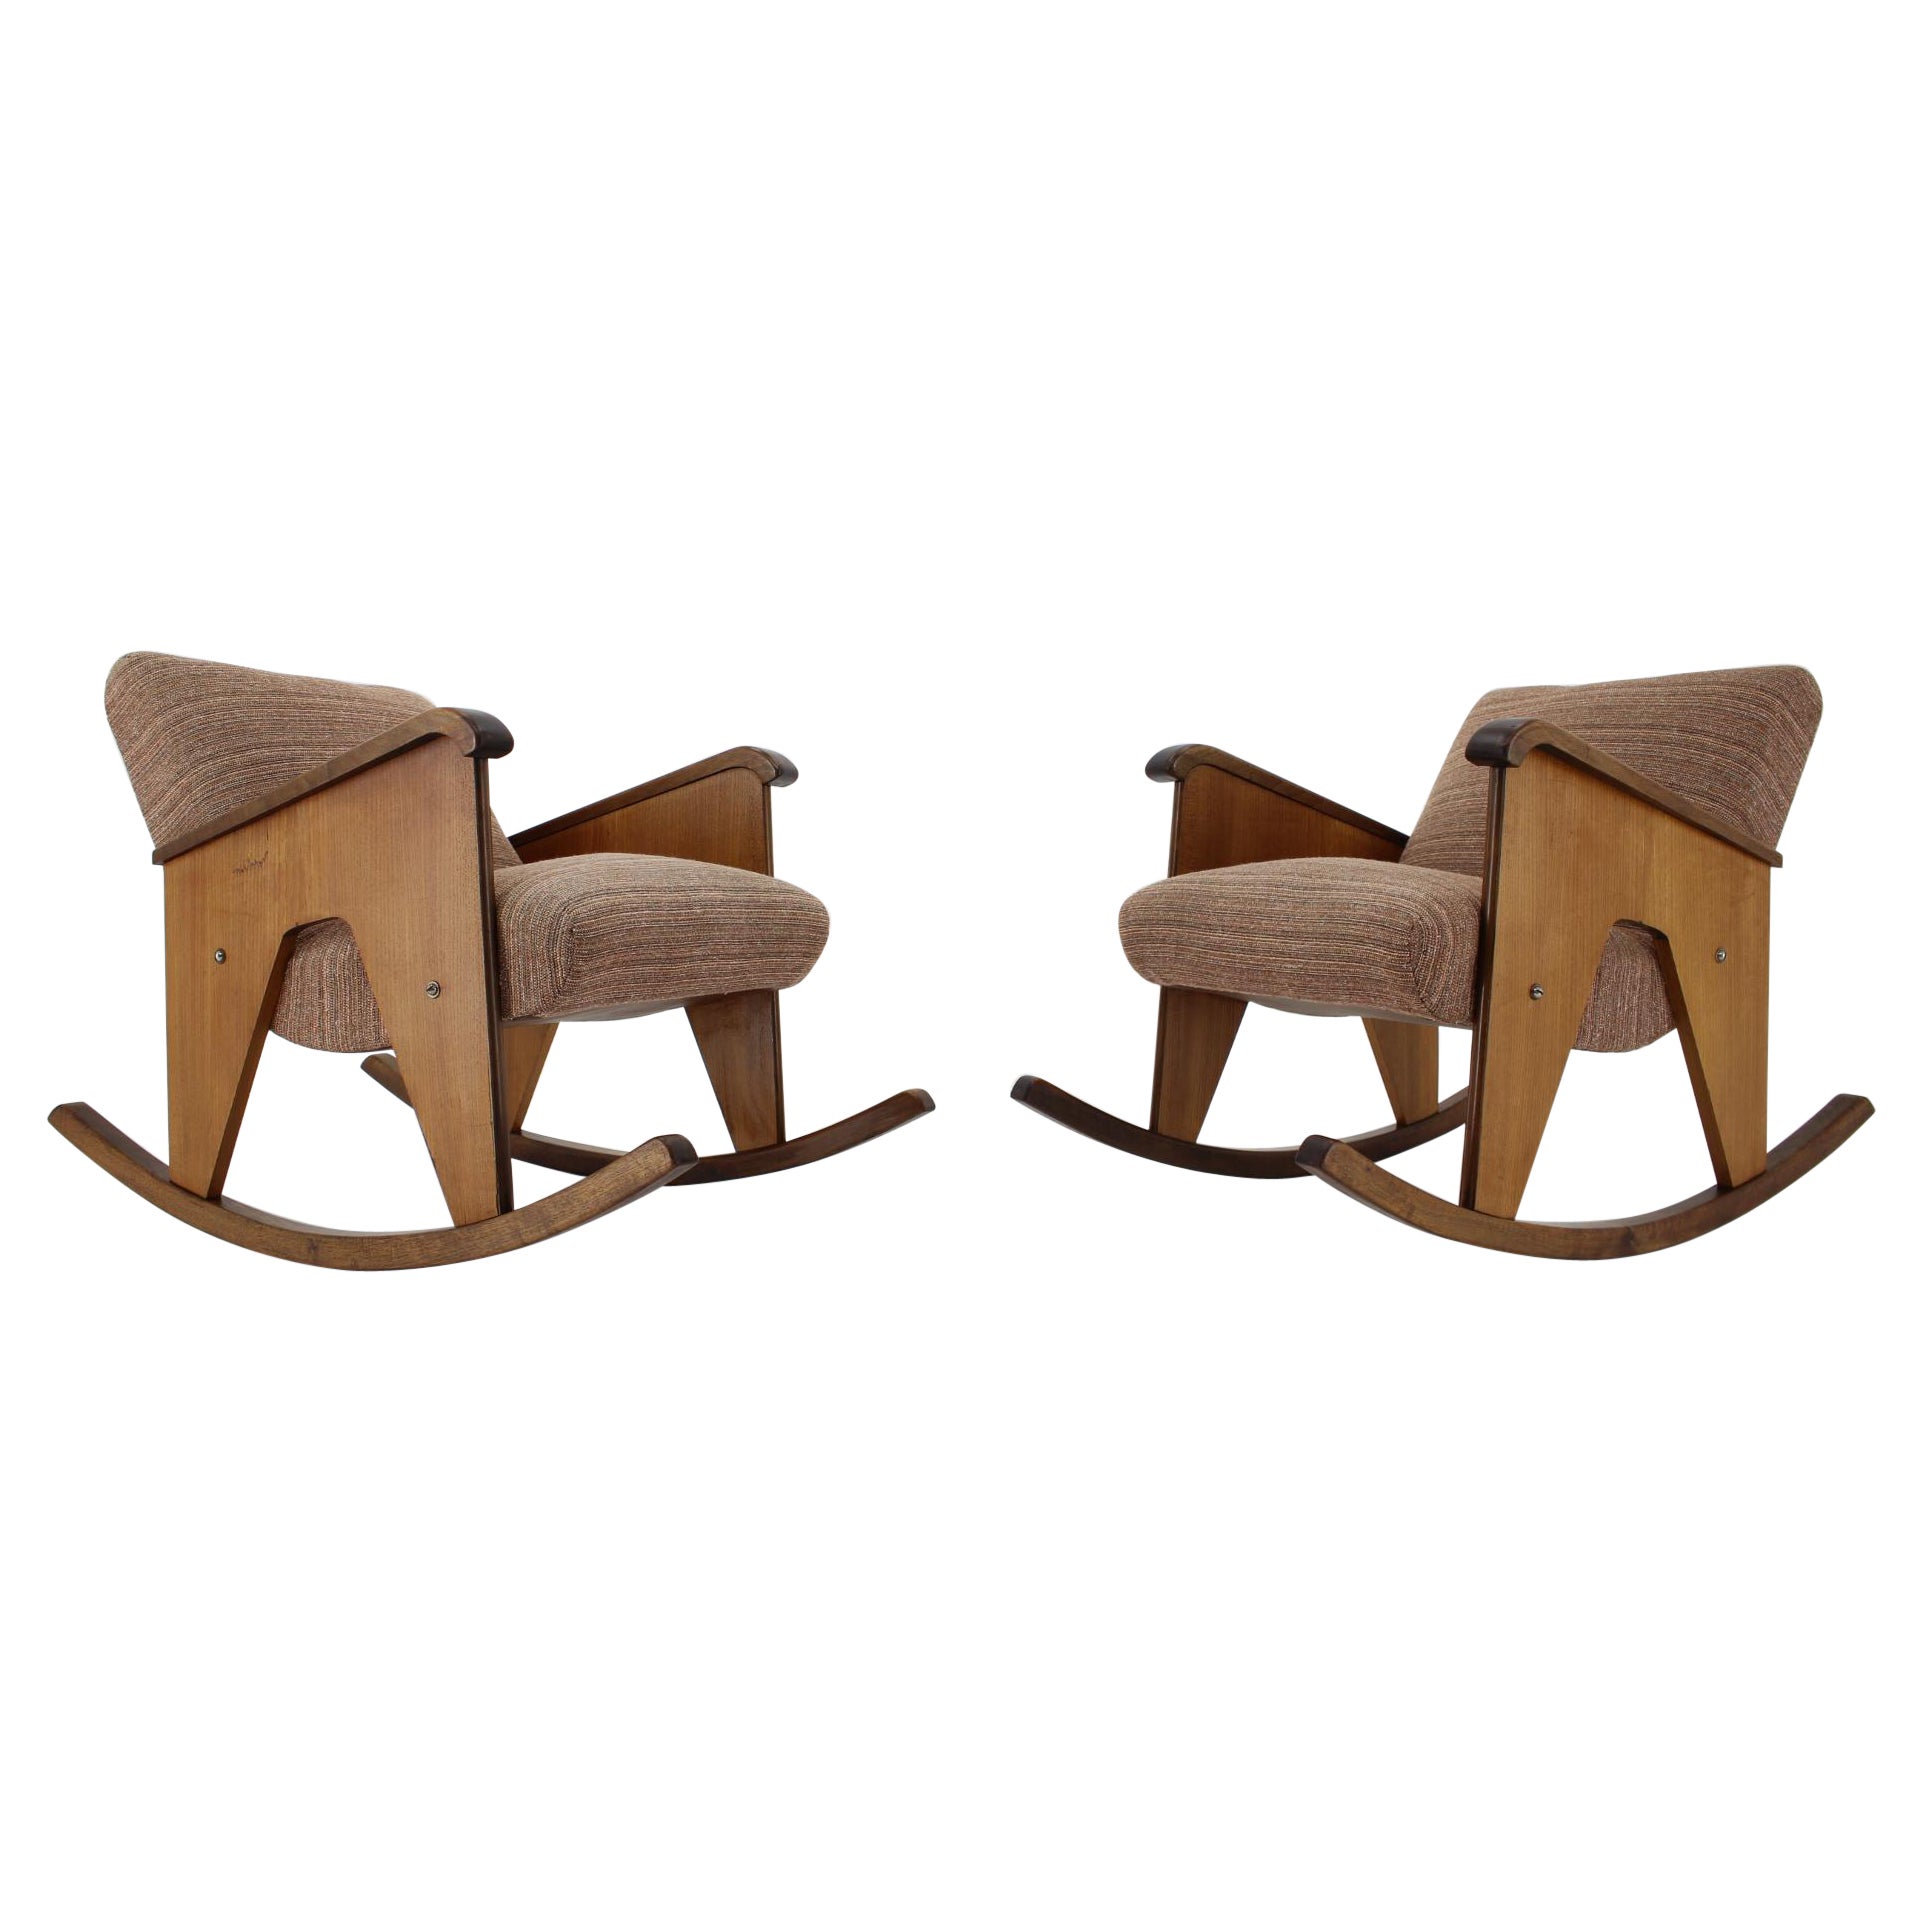 Pair of Two Mid Century Design Rocking Chairs, Czechoslovakia, 1960s